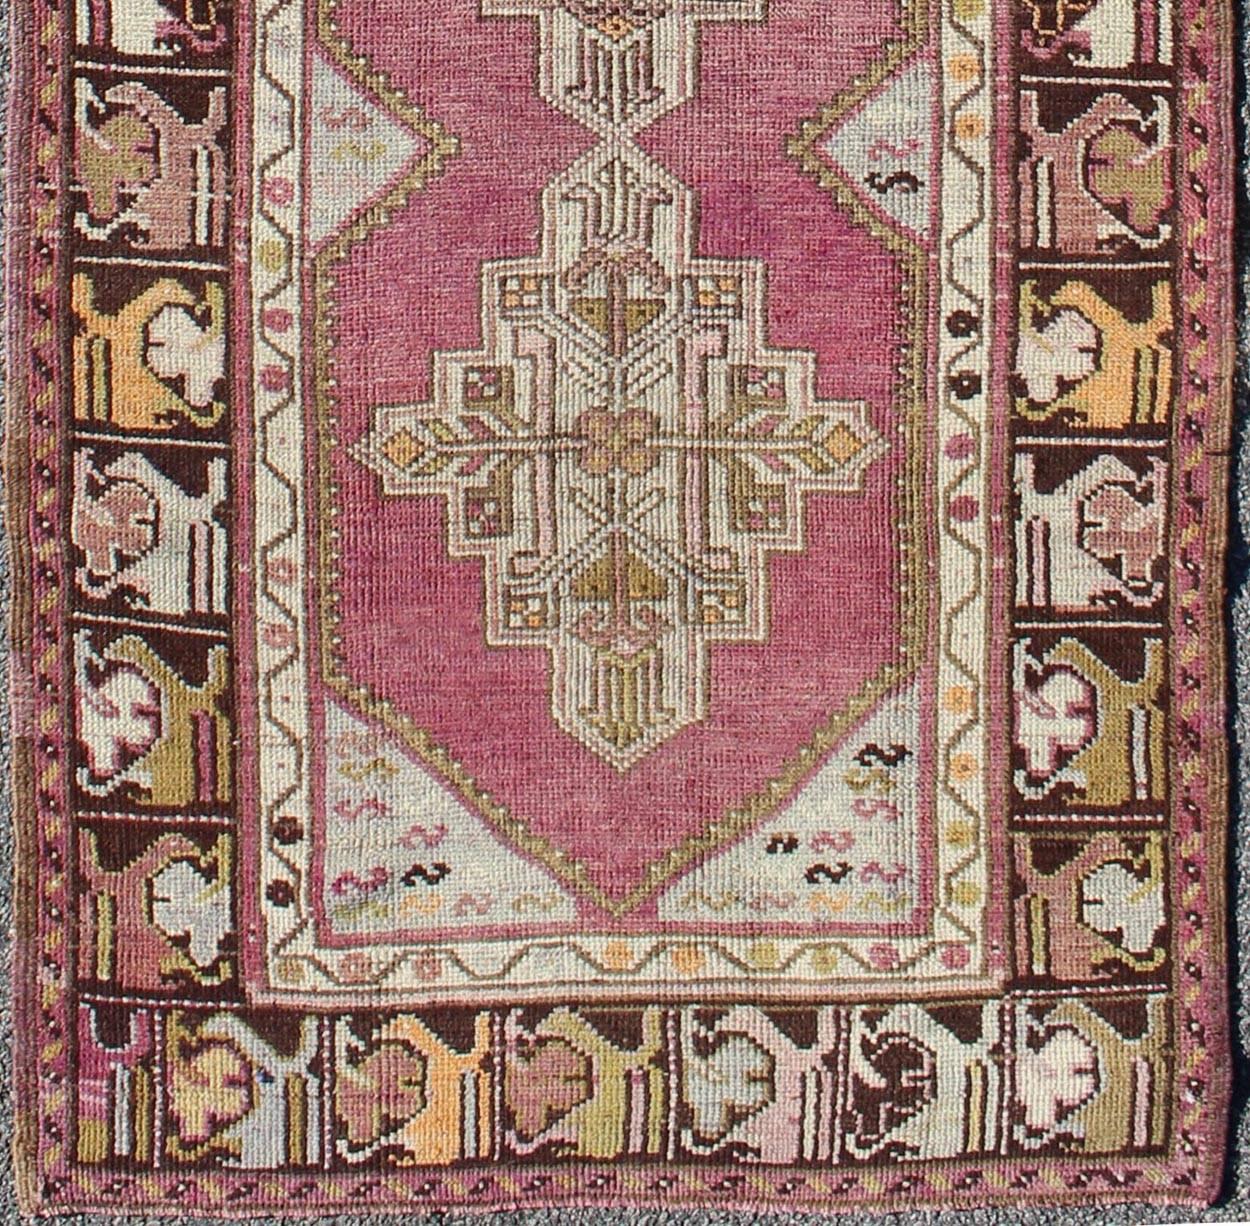 Vintage Oushak Runner with Geometric Medallions in Purple and Brown.
This unique Oushak short runner bears a remarkable geometric design that is complemented by a delicately understated color palette. The purple background plays host to an